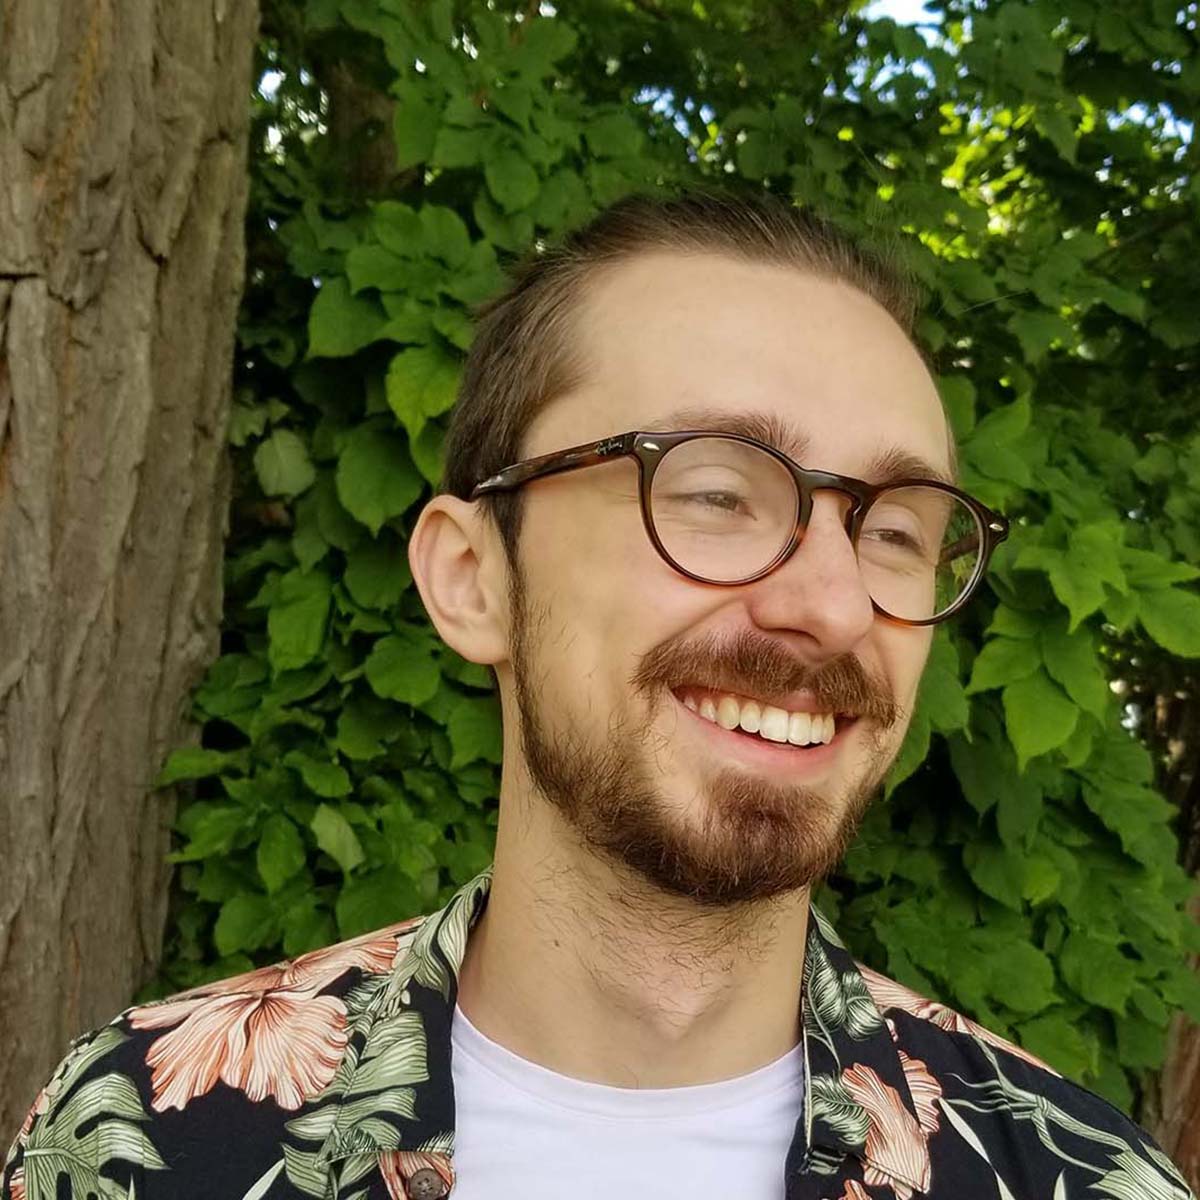 Photo of Carson Custer, a young white man with glasses and a bright floral shirt, smiling in front of greenery